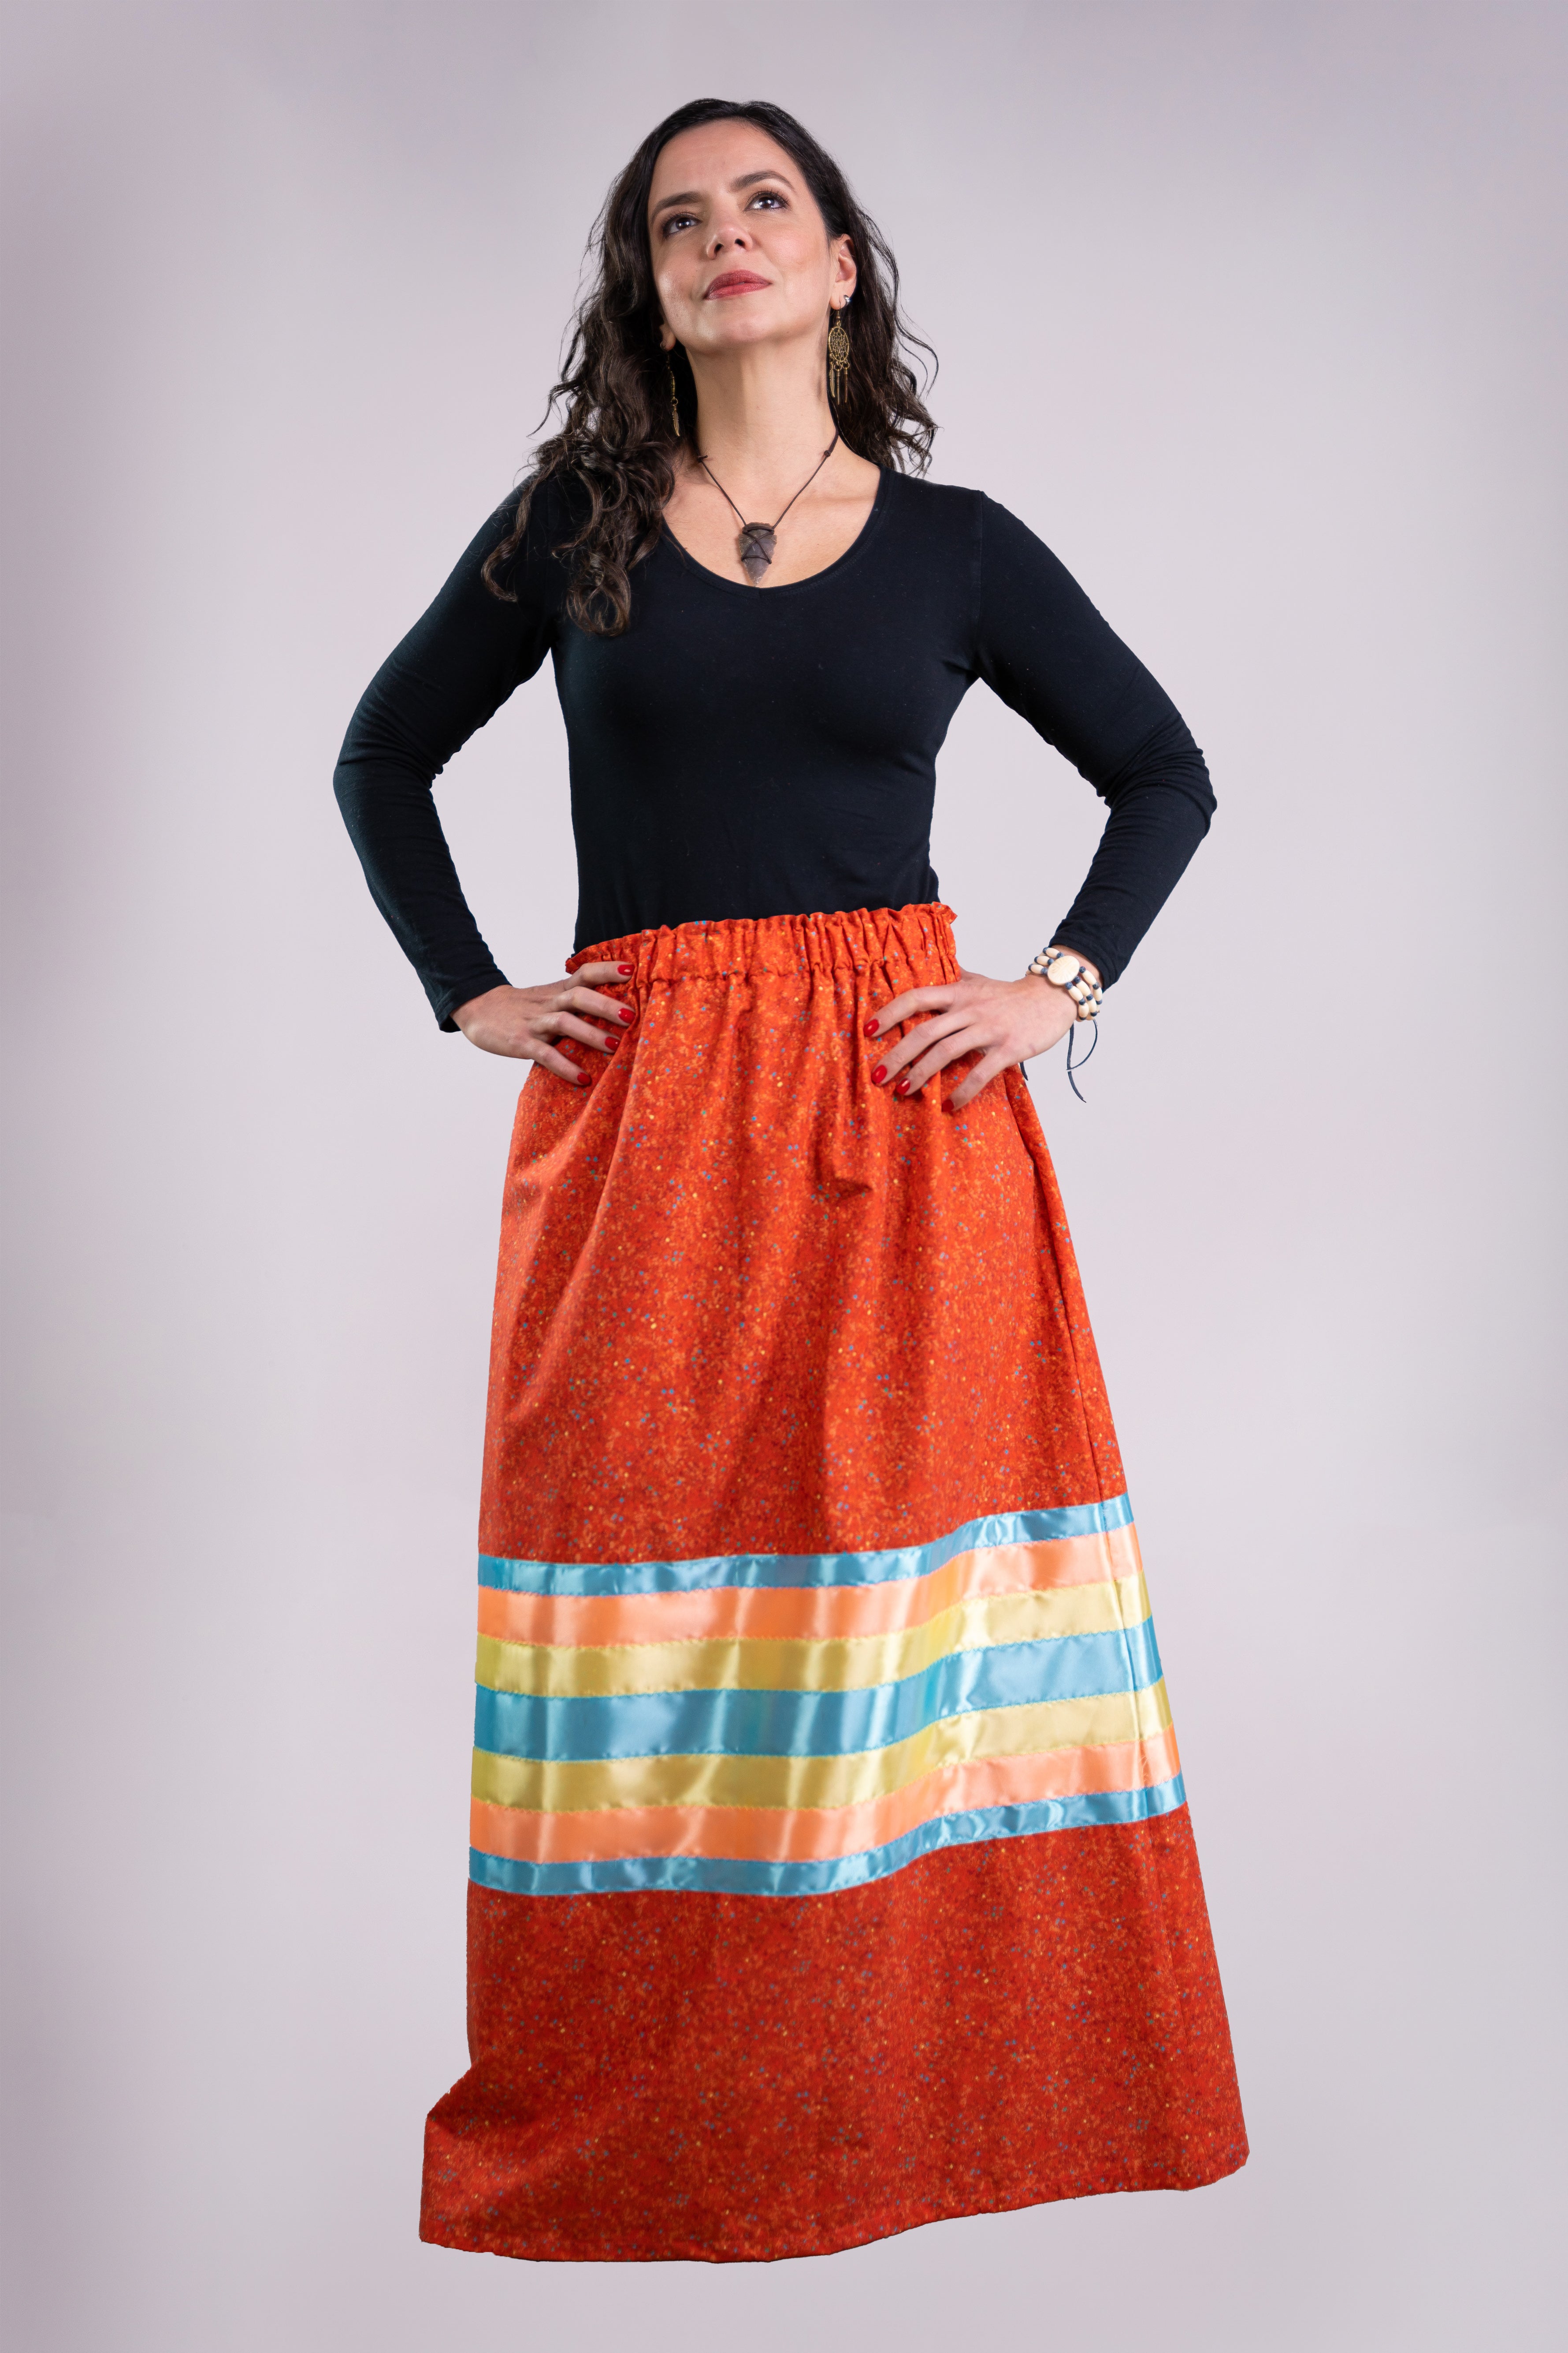 Ribbon Skirt, 100% Cotton, All sizes, Indigenous made, Custom Orders,  Choice of Material, Pockets, Waist, Ribbon Color, Width and Quantity.